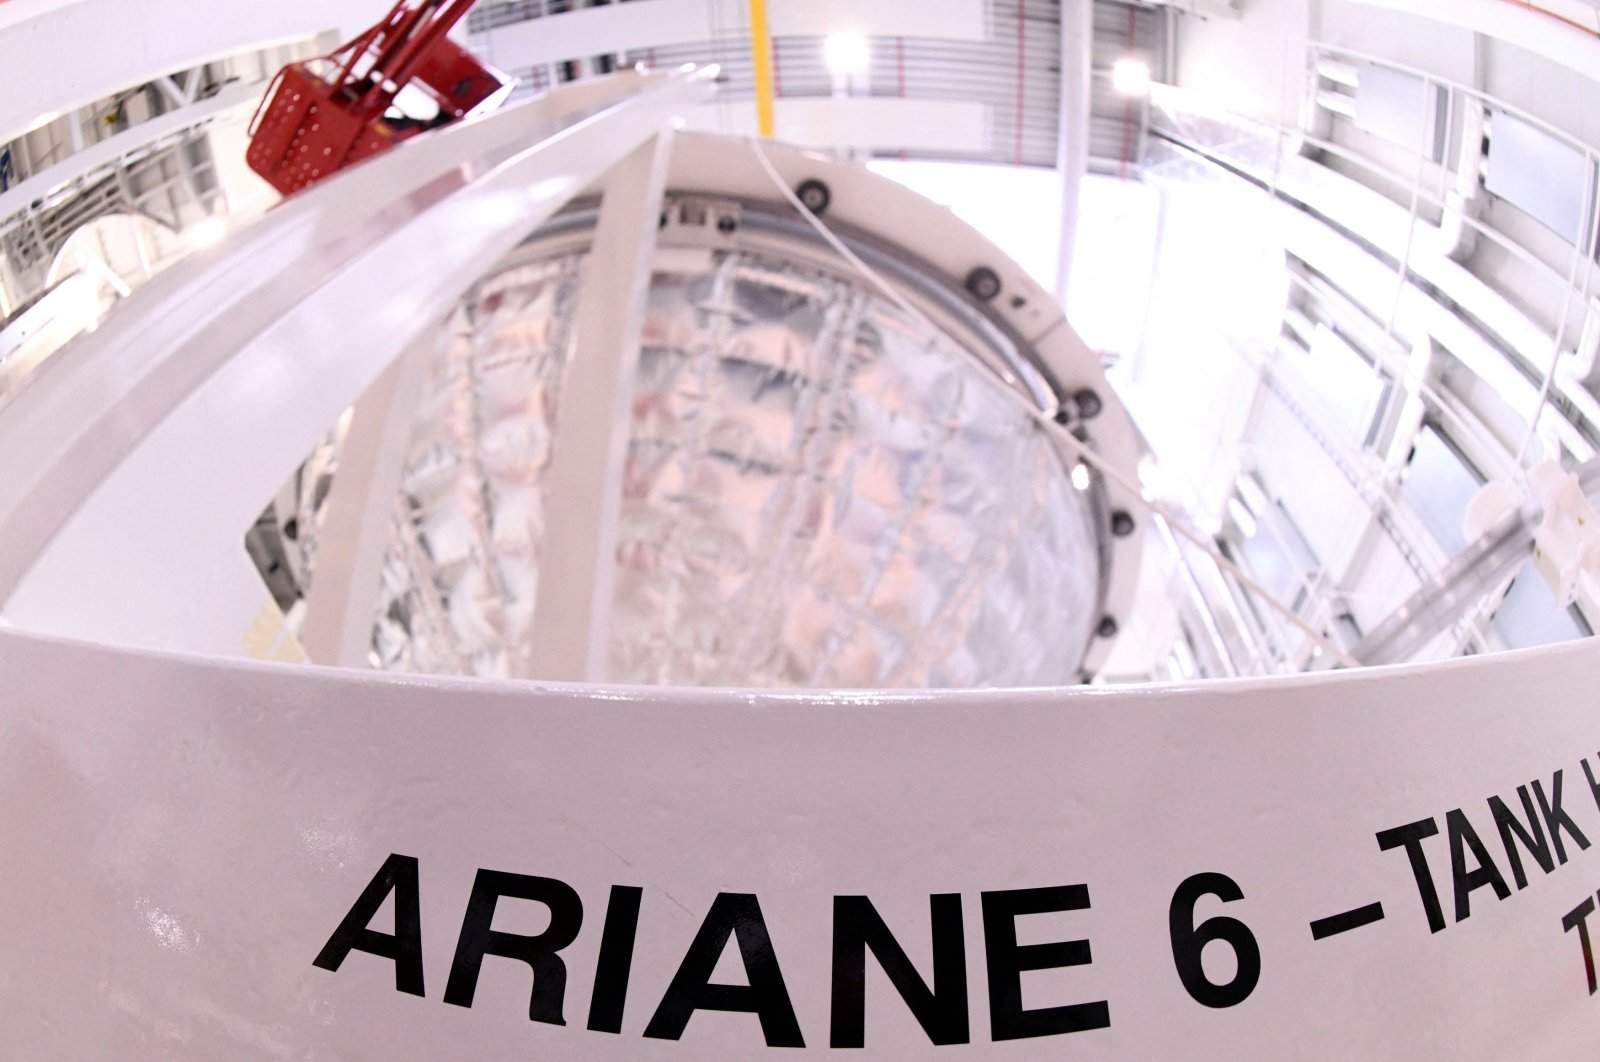 A tank of Ariane 6, Europe&#039;s next-generation space rocket, is pictured in a production line of Ariane Group in Bremen, Germany, Feb. 19, 2019. (REUTERS/Fabian Bimmer)